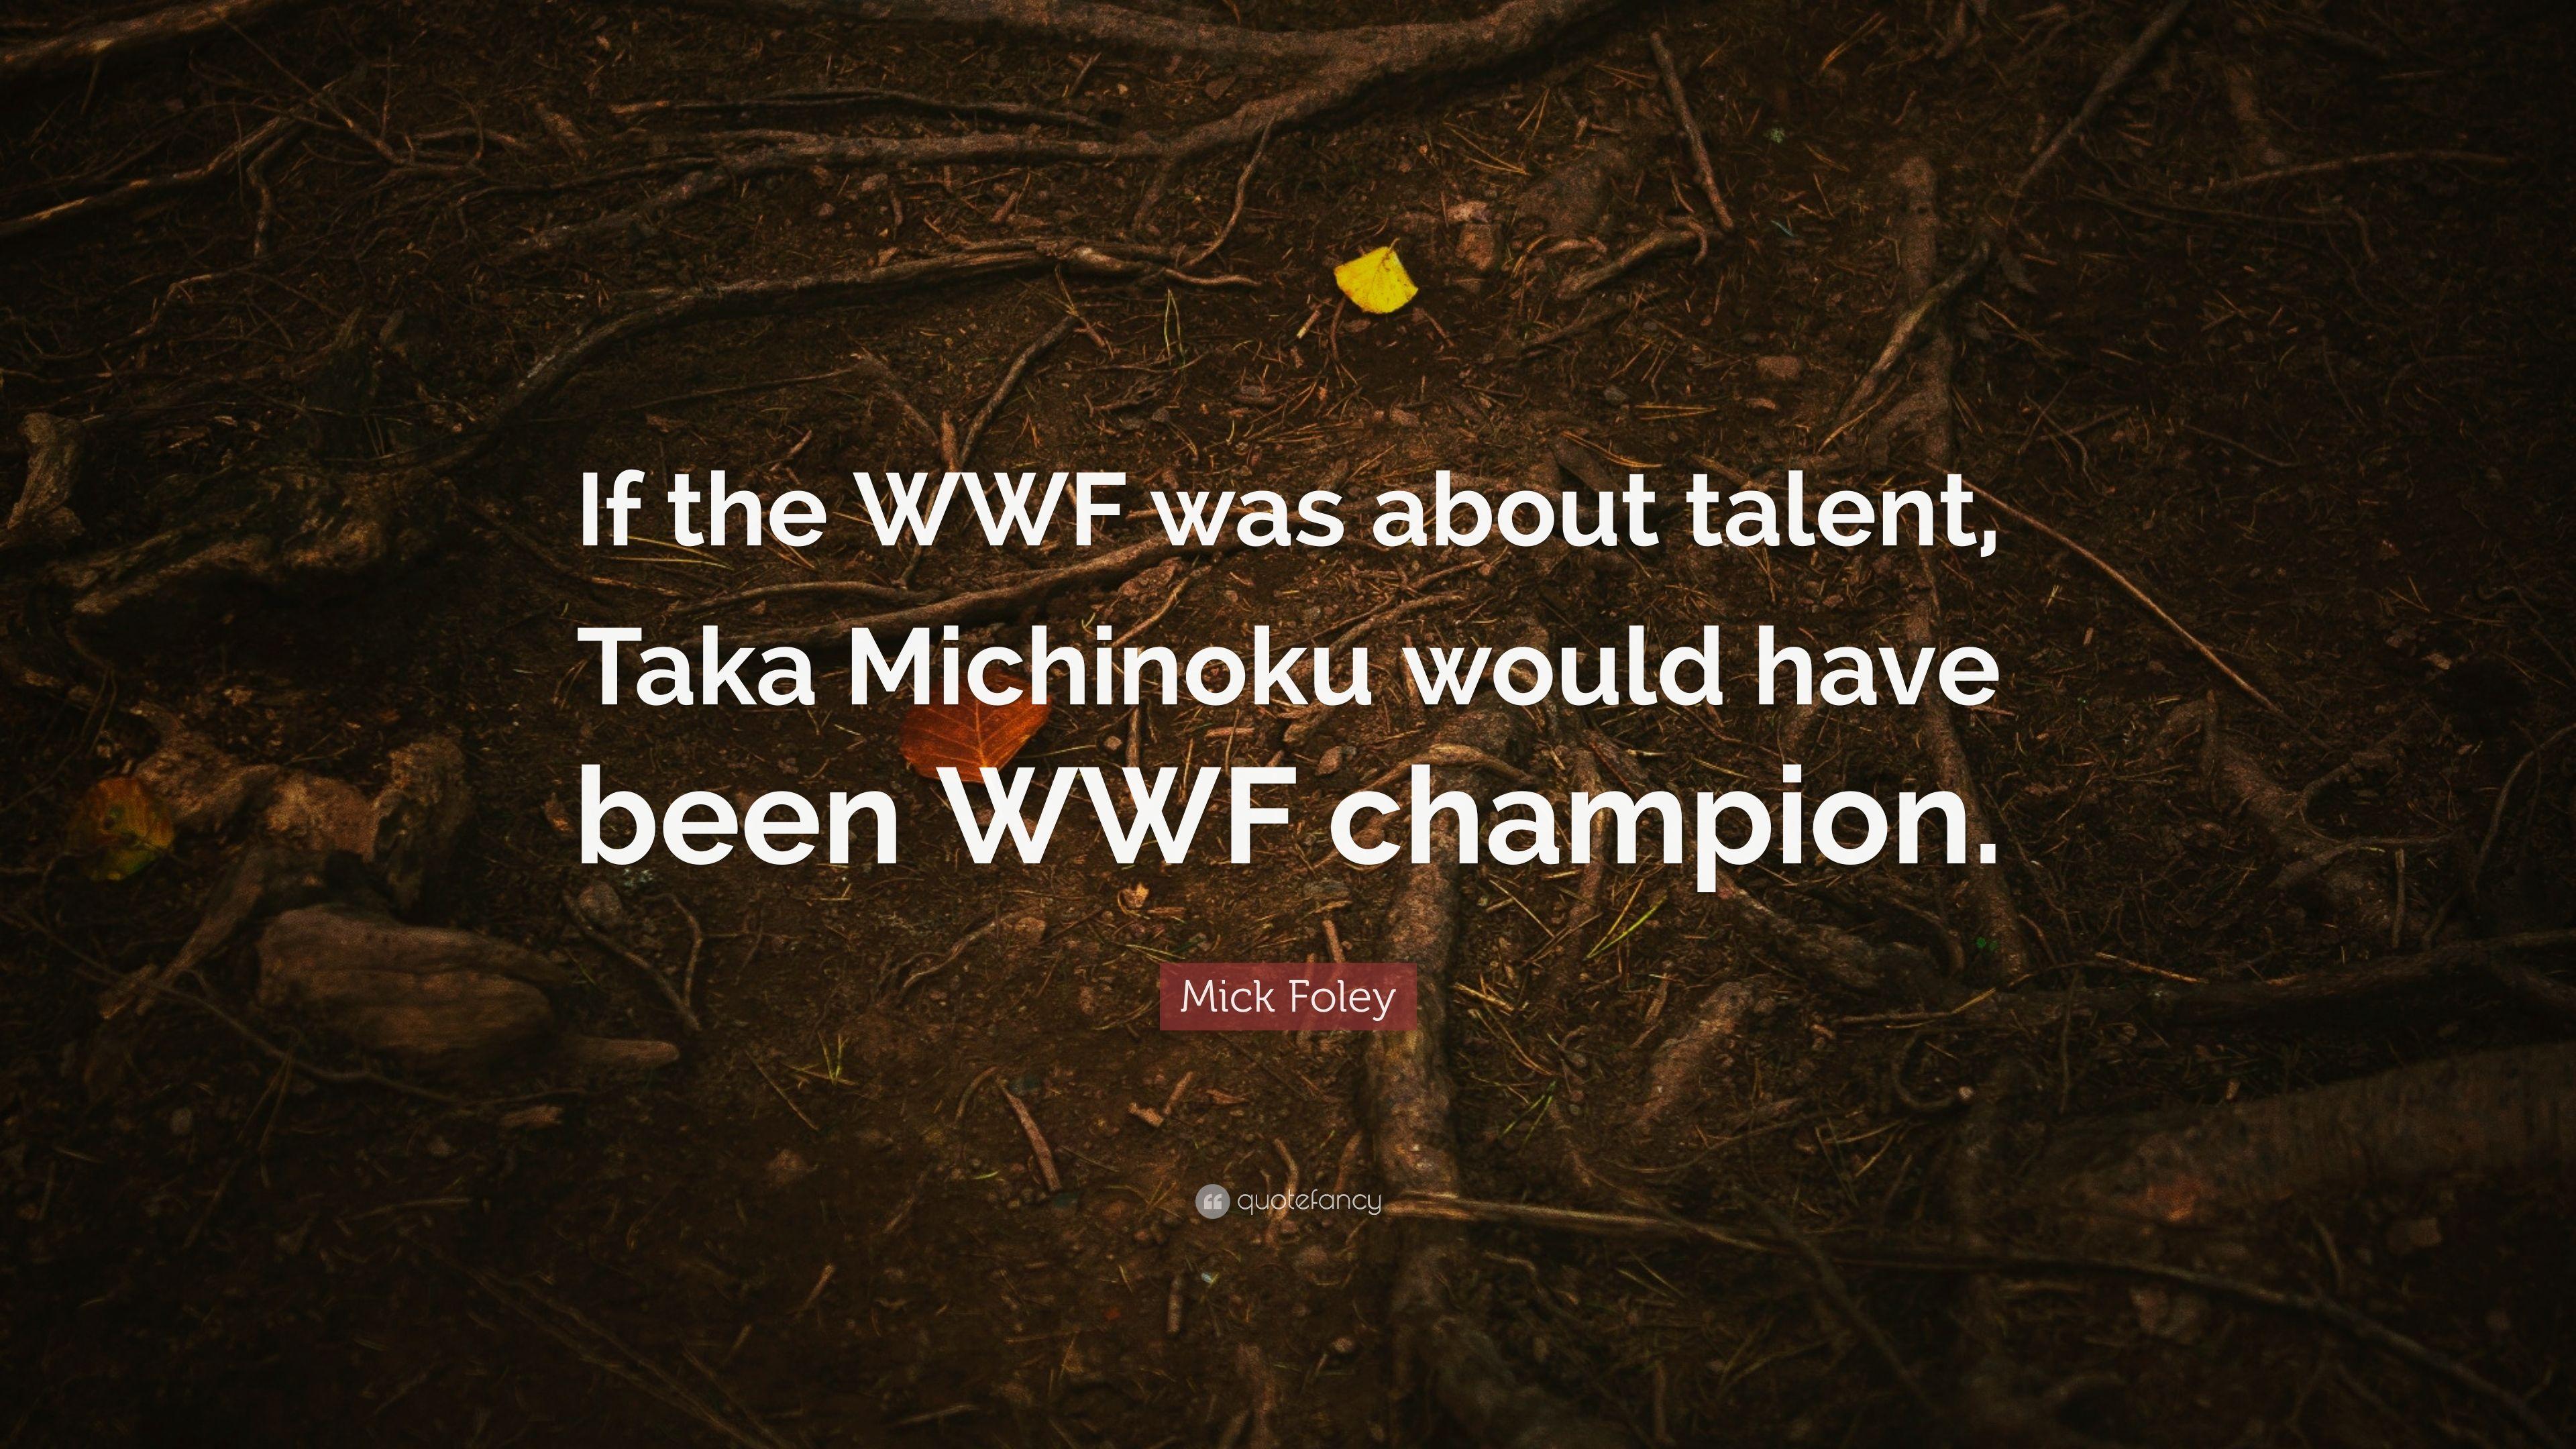 Mick Foley Quote: “If the WWF was about talent, Taka Michinoku would